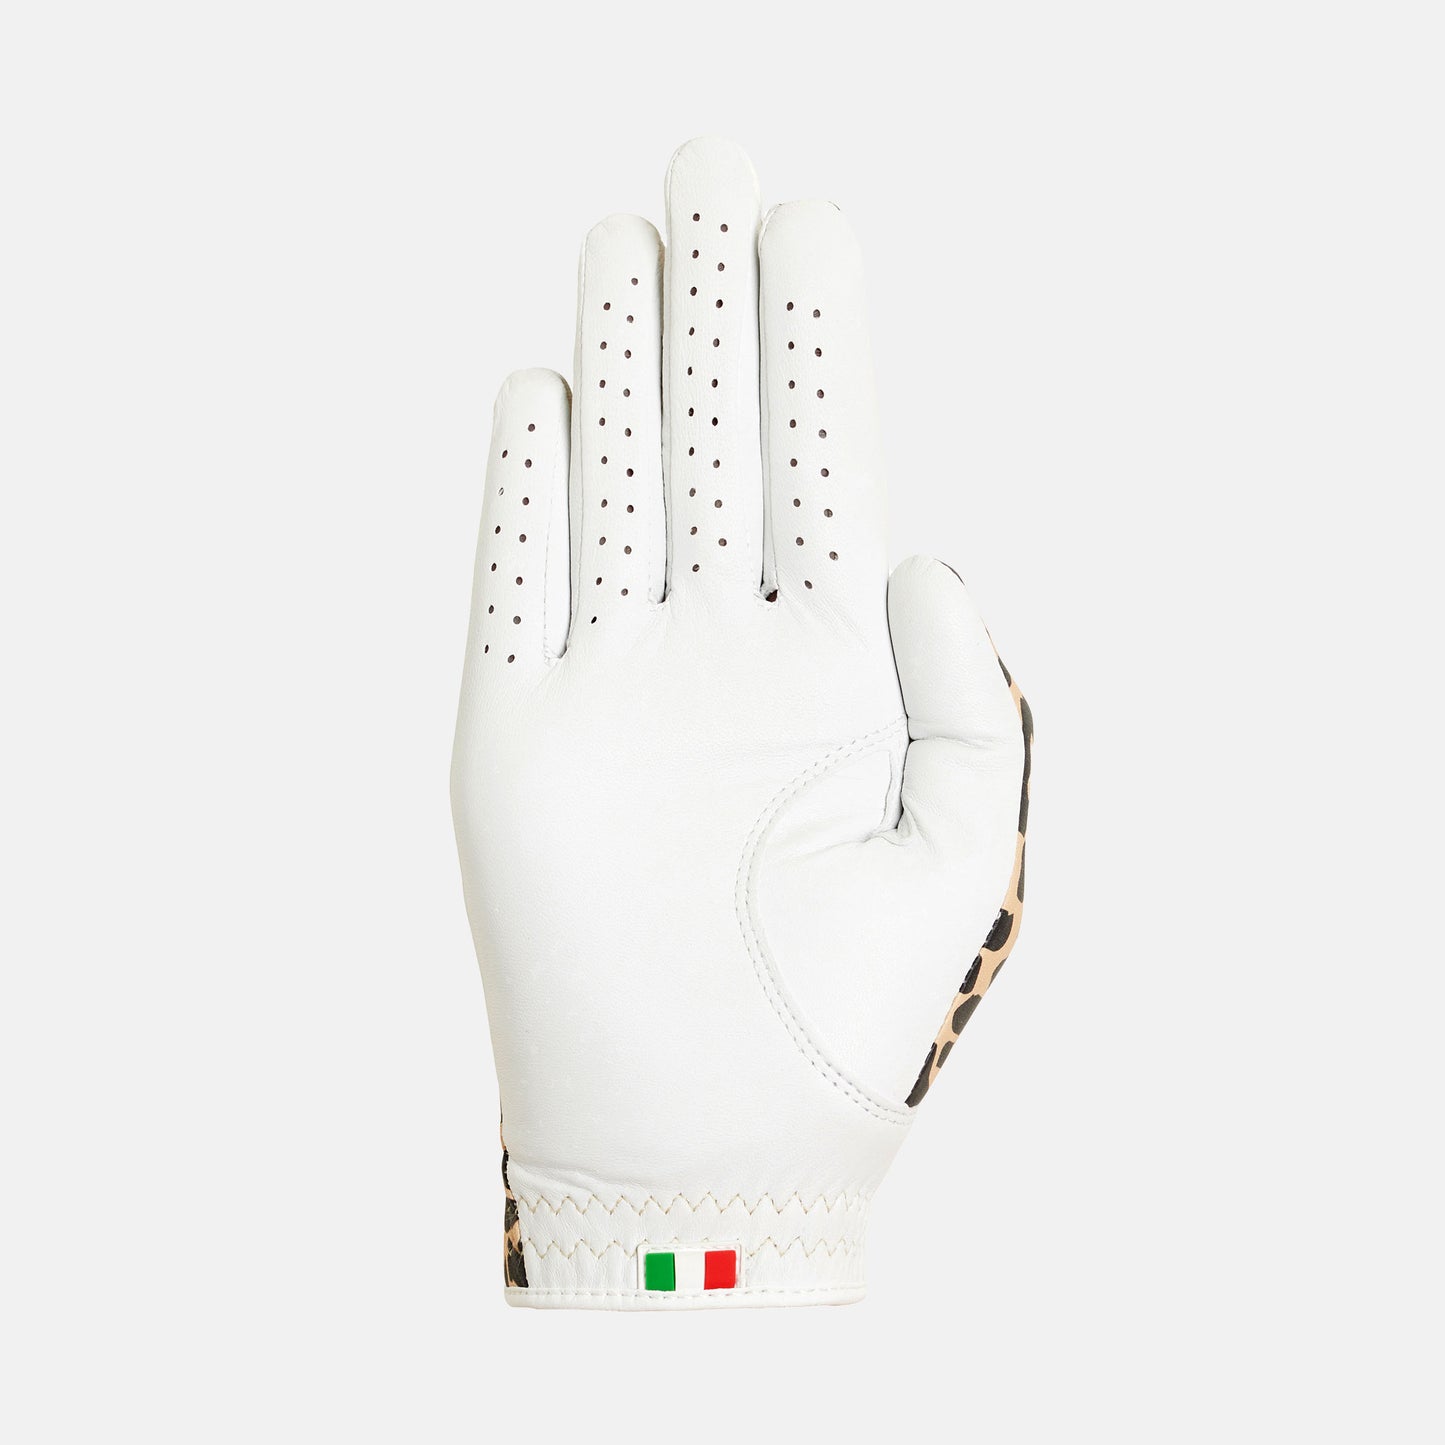 right-handed golf glove for women's designed for left-handed players, features a premium combination of Cabretta leather and microfibre leather.